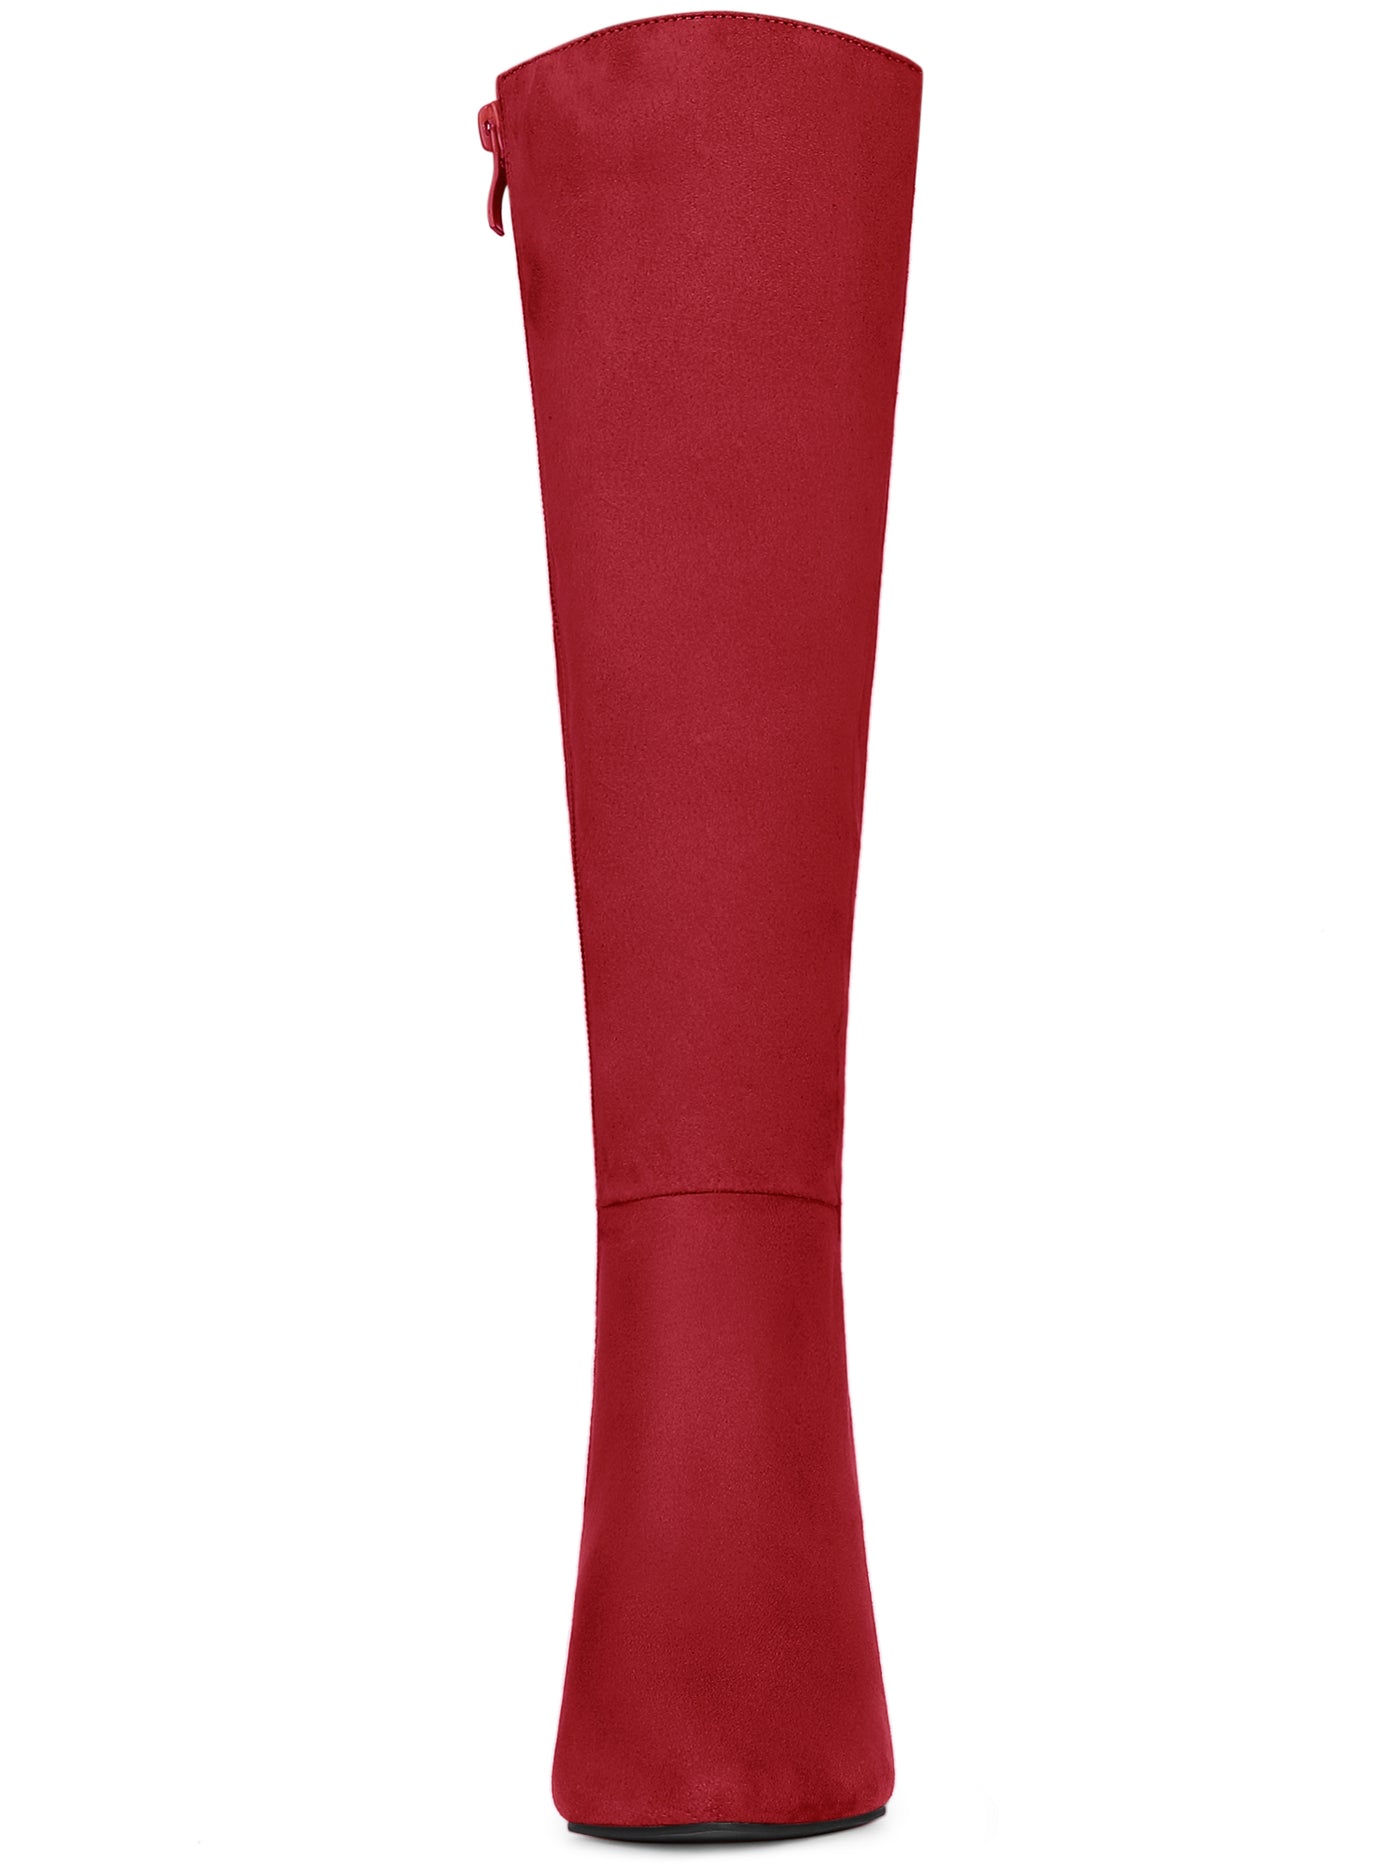 Bublédon Perphy Women's Pointed Toe Stiletto Heel Side Zip Knee High Boots